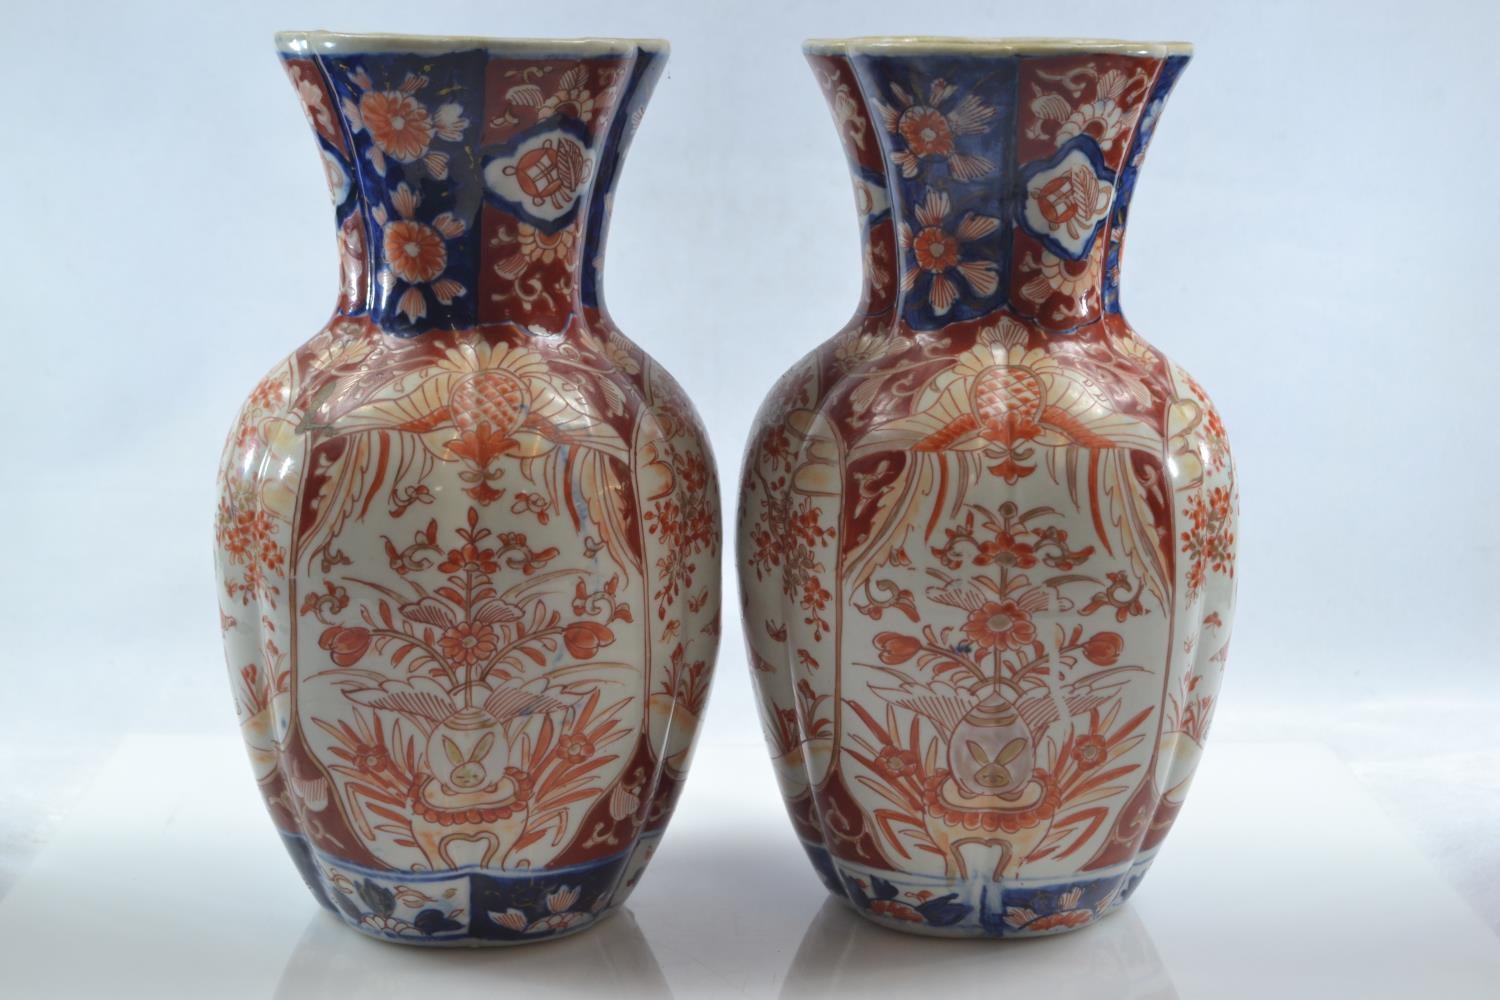 Pair of Japanese Imari vases decorated with figures and foliage, height 25cm, dia. approx. 14cm  - Image 4 of 5